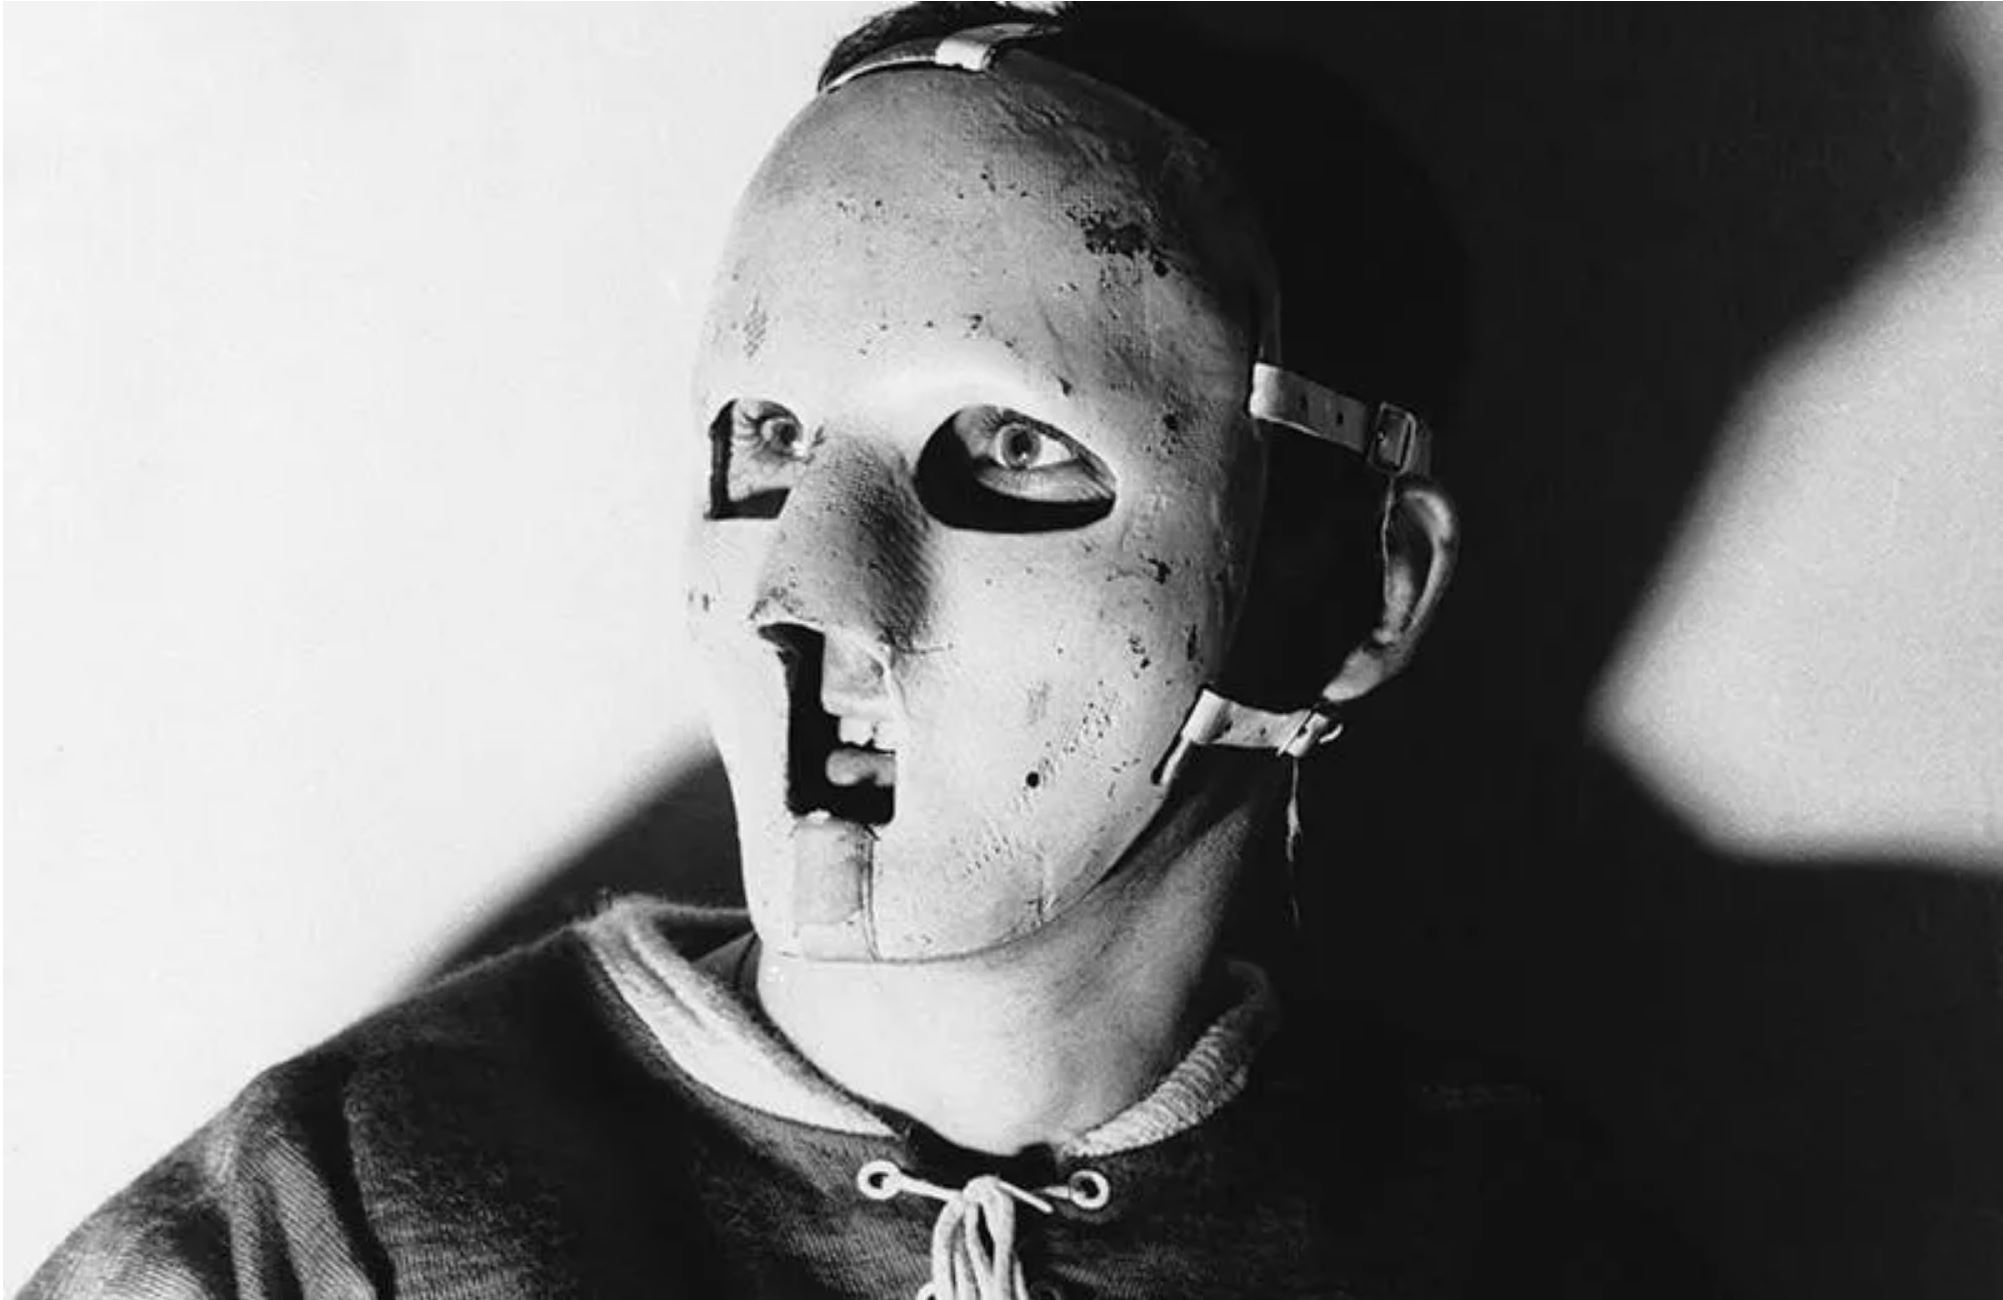 Jacques Plante wearing a mask